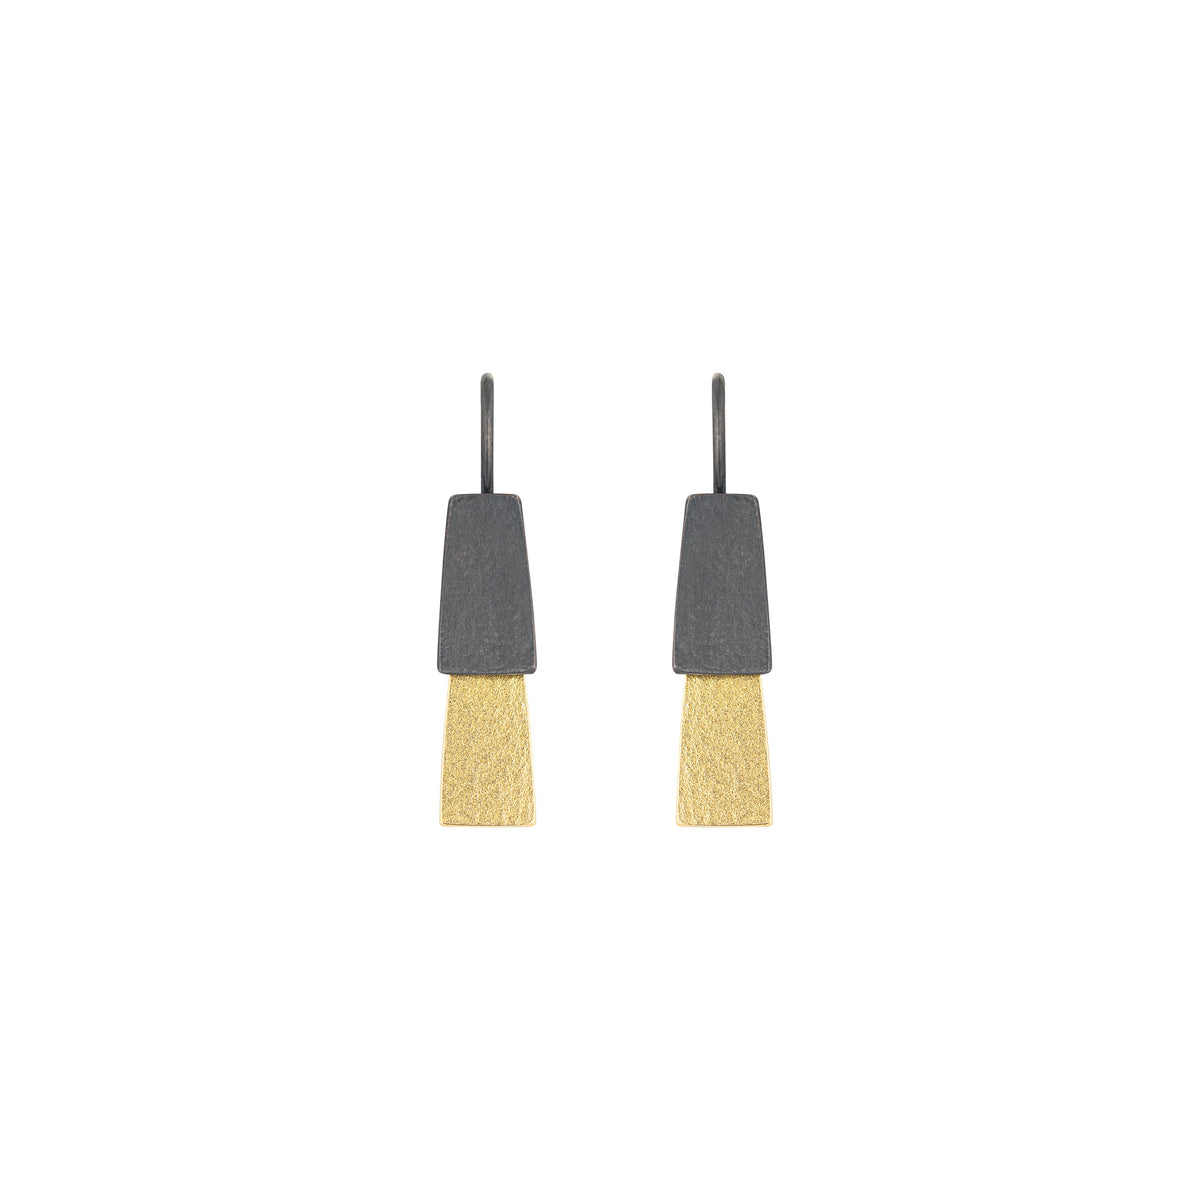 Two tone drop earrings - oxidised silver and 18ct gold